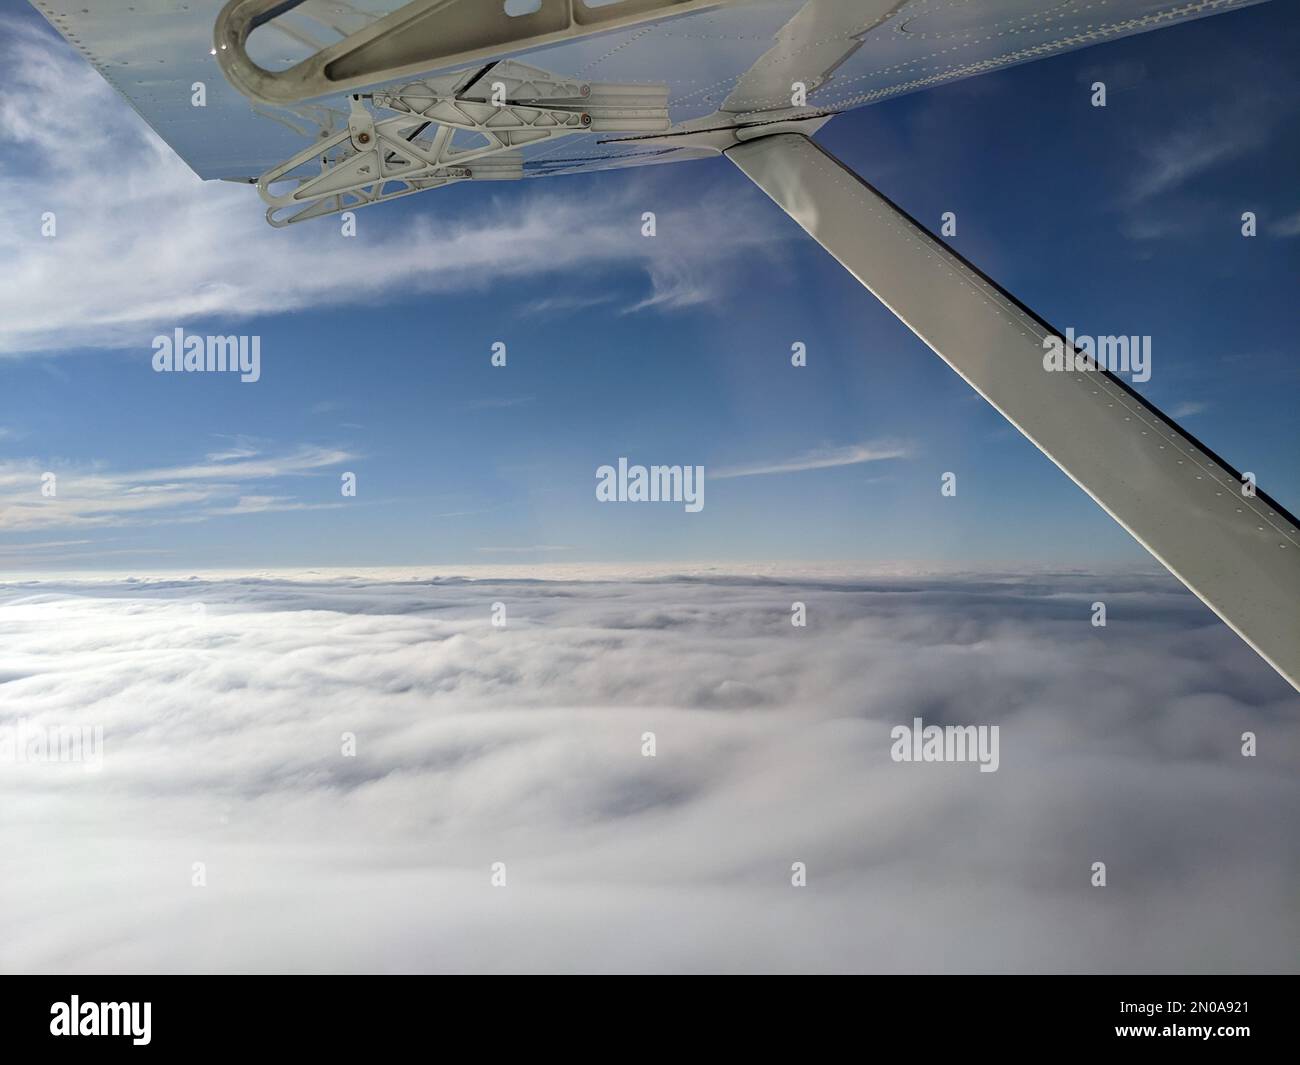 Window view from light general aviation aircraft. Strut and wing of semi-cantilever high-wing airplane flying over the clouds on a sunny day. Stock Photo